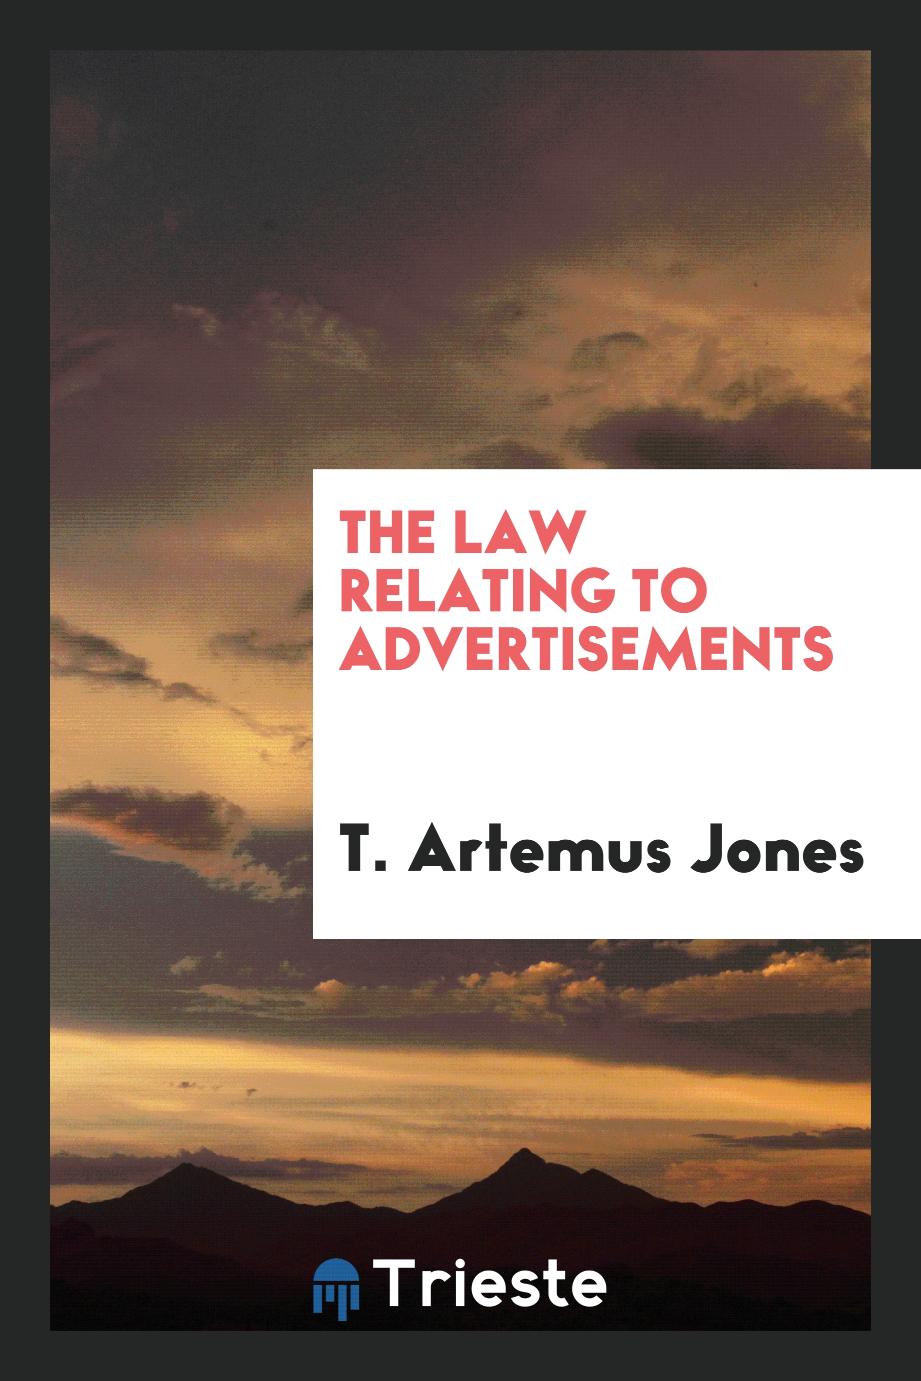 The law relating to advertisements